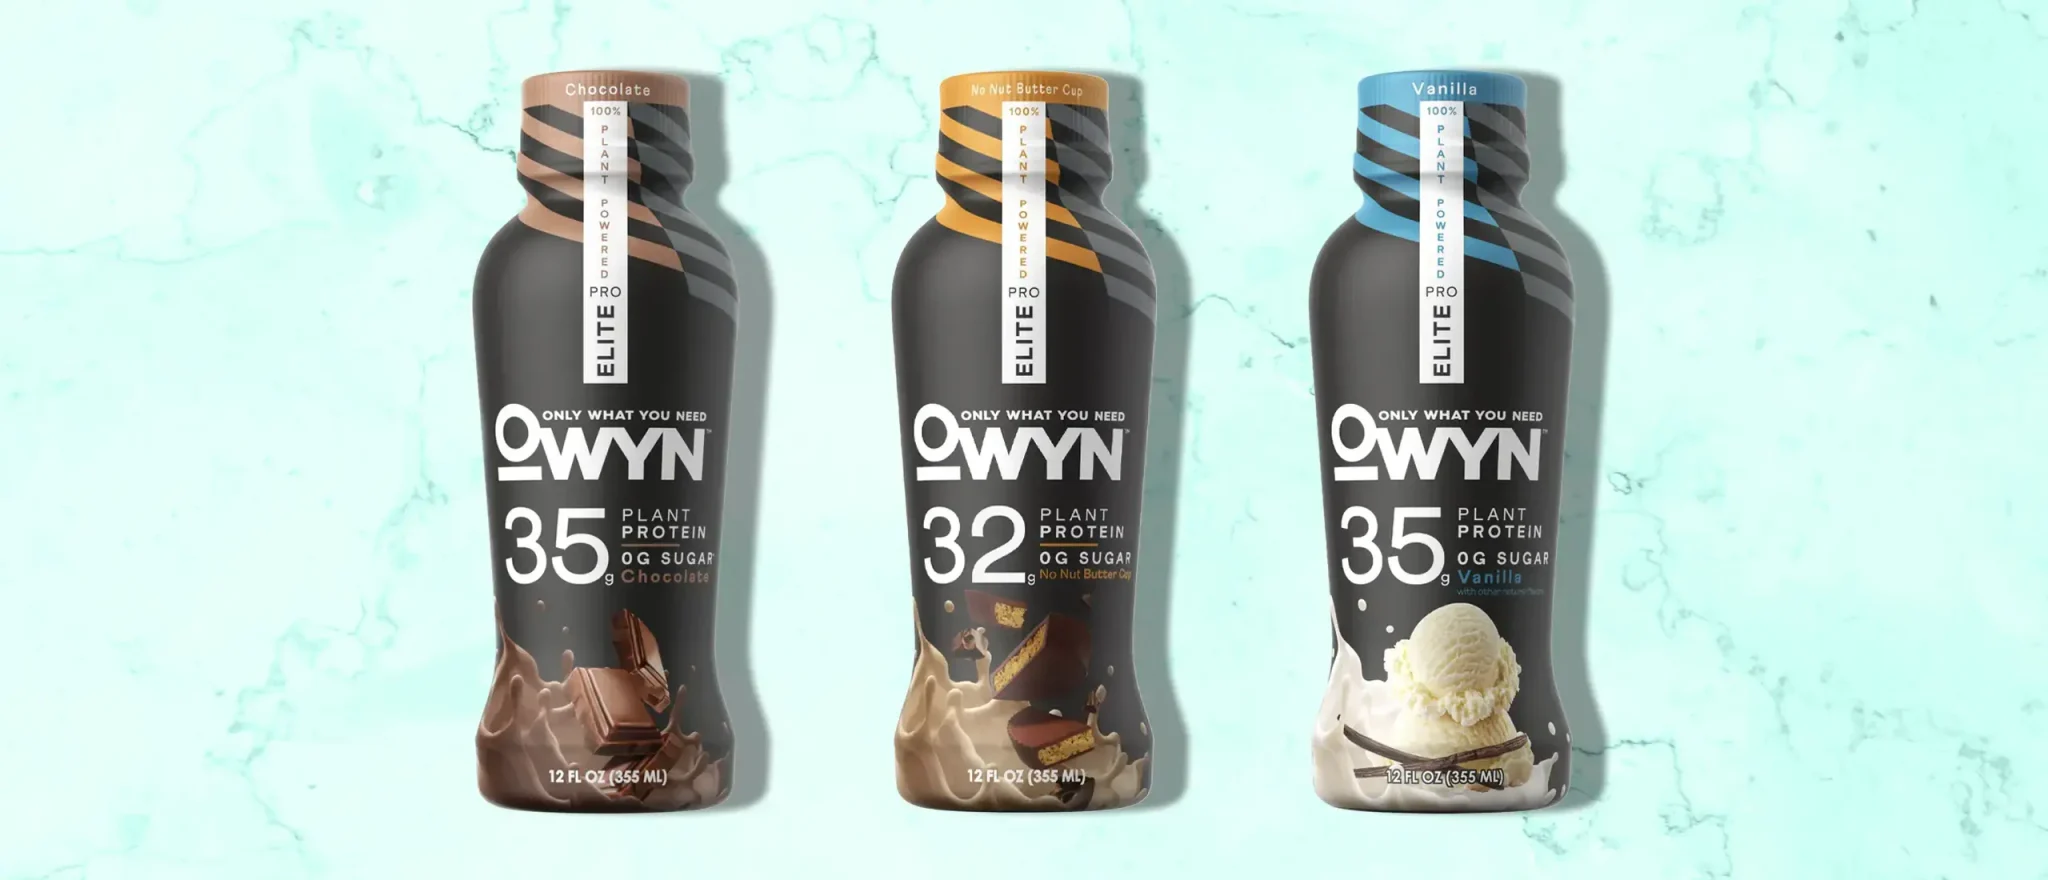 Our Honest Review of OWYN Protein Shakes